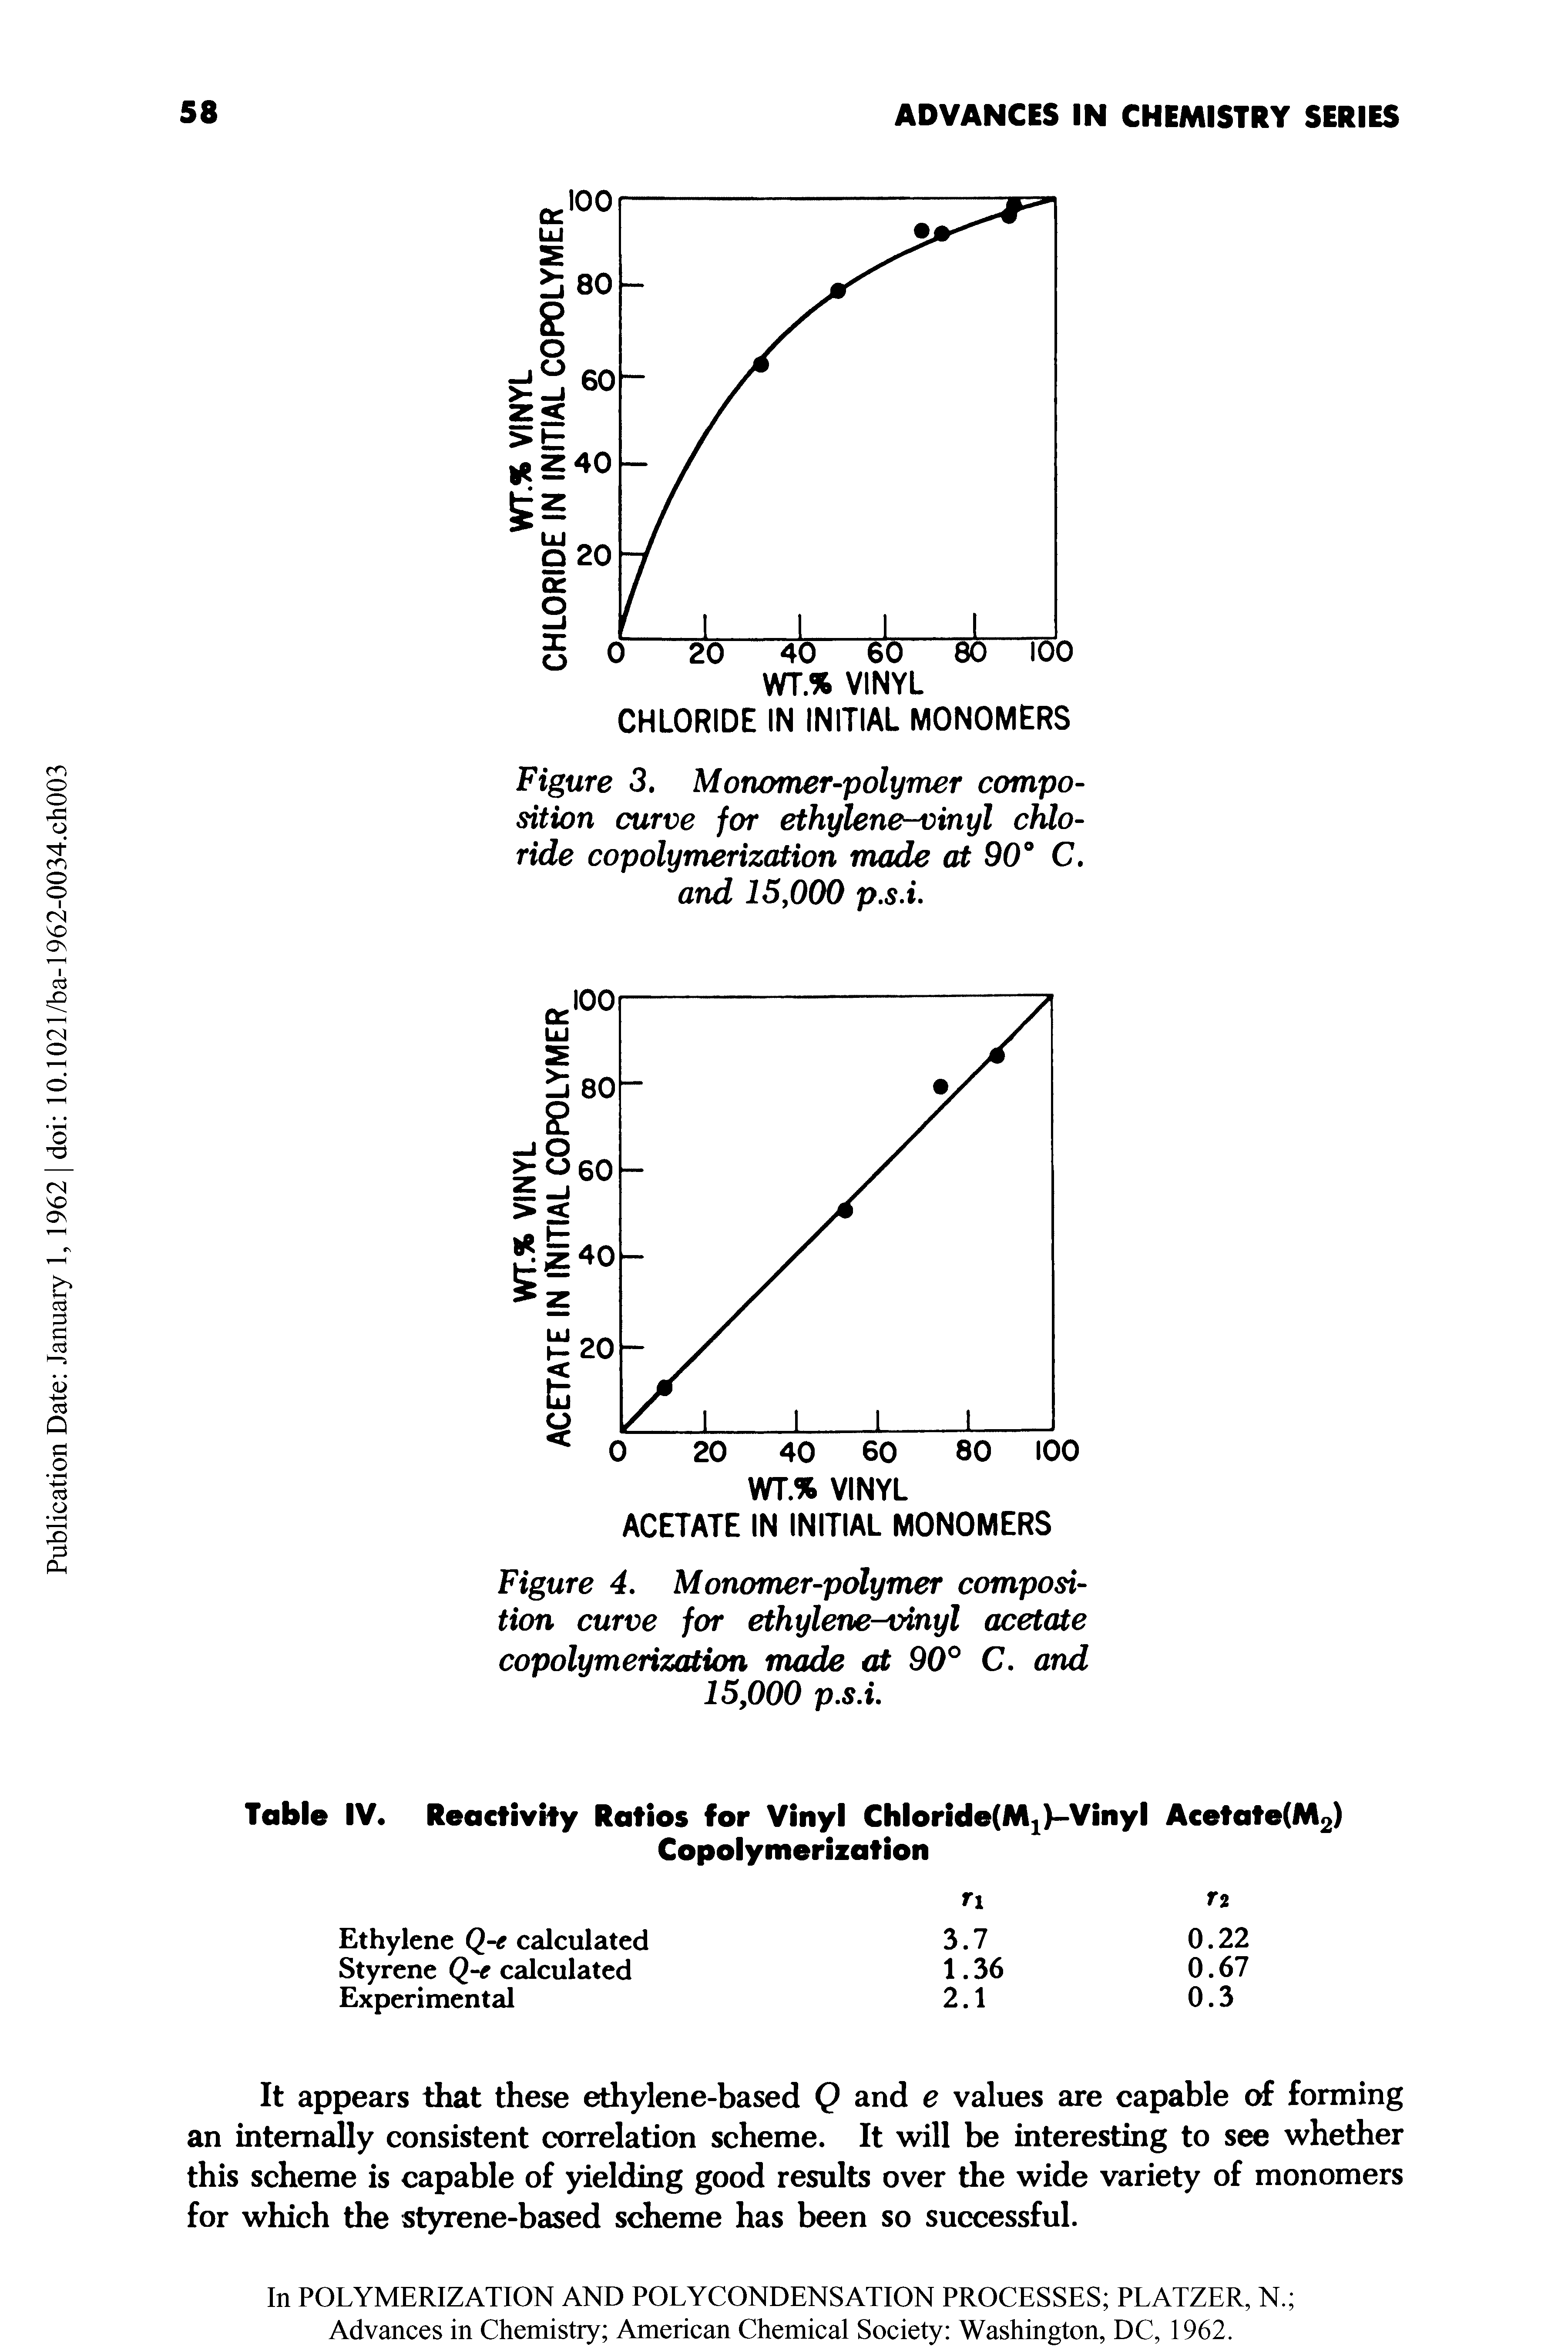 Figure 3, Monomer-polymer composition curve for ethylene-vinyl chloride copolymerization made at 90° C. and 15,000 p.s.i.